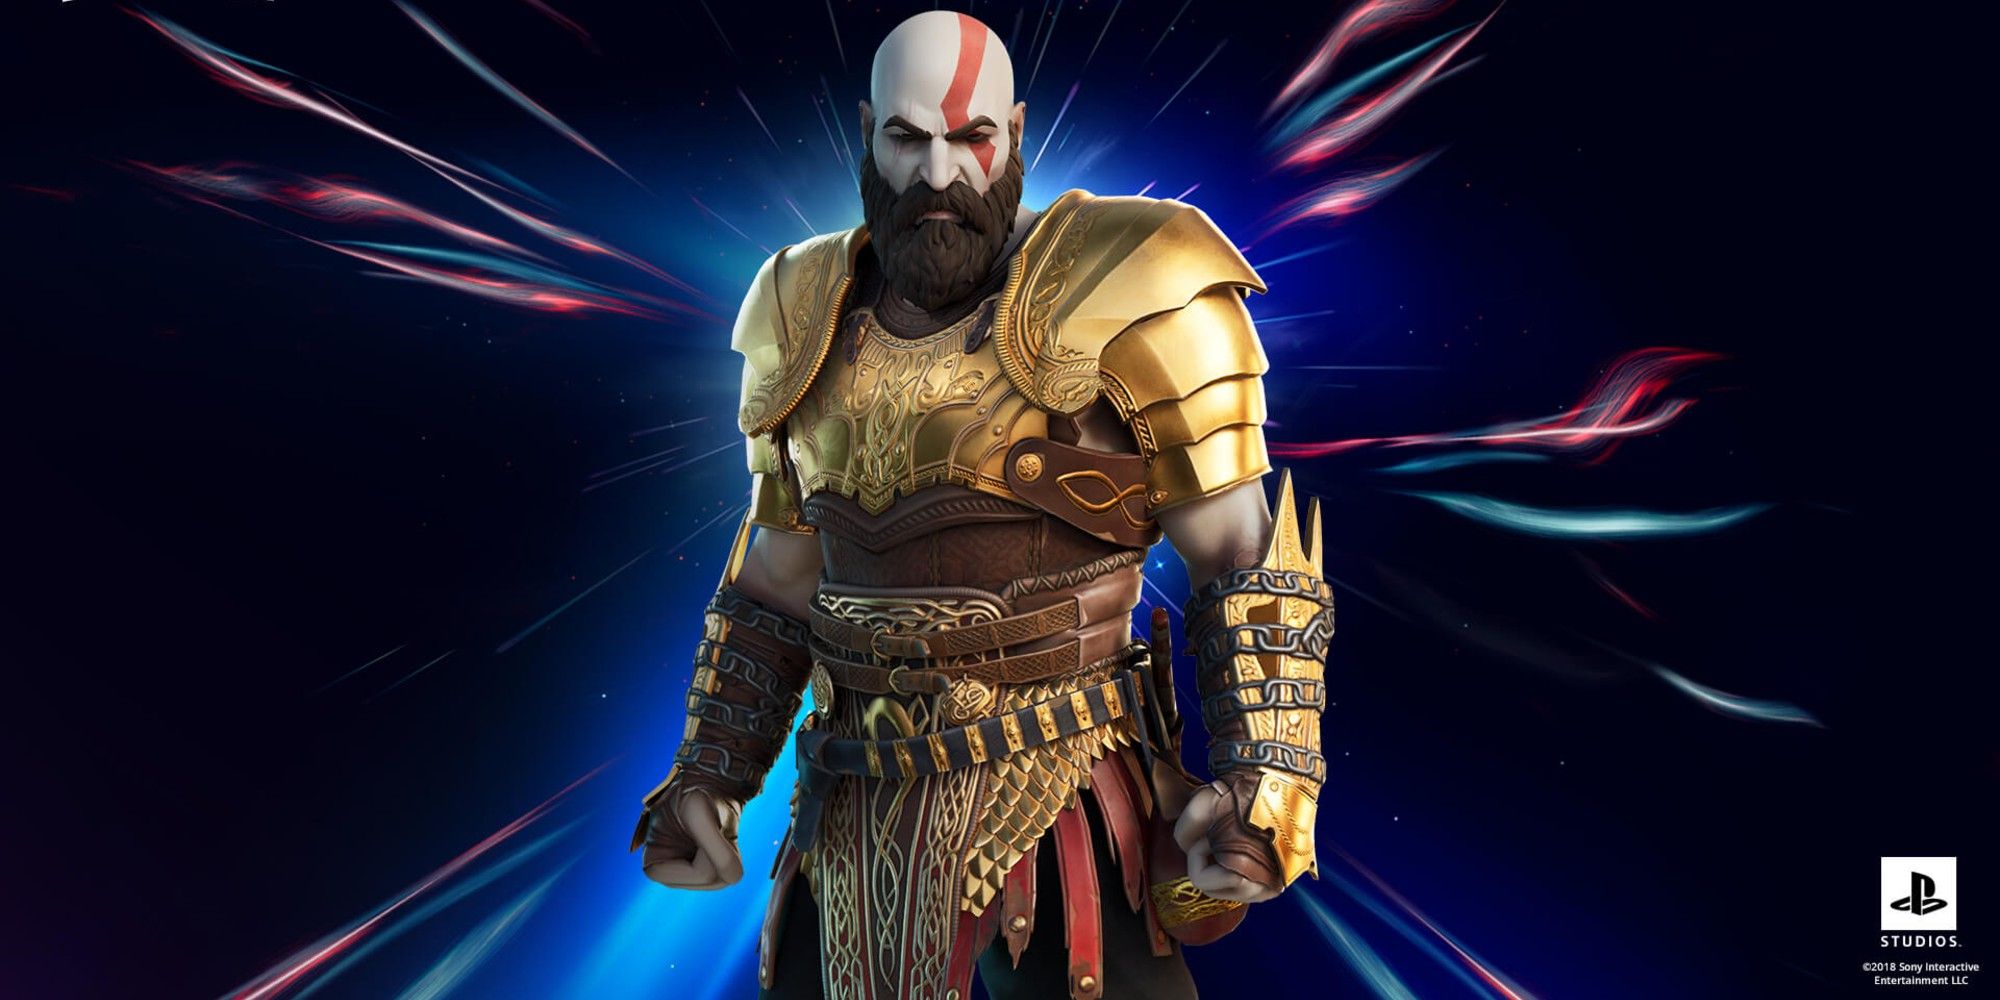 The exclusive Kratos skin Armored style for Fortnite Season 5